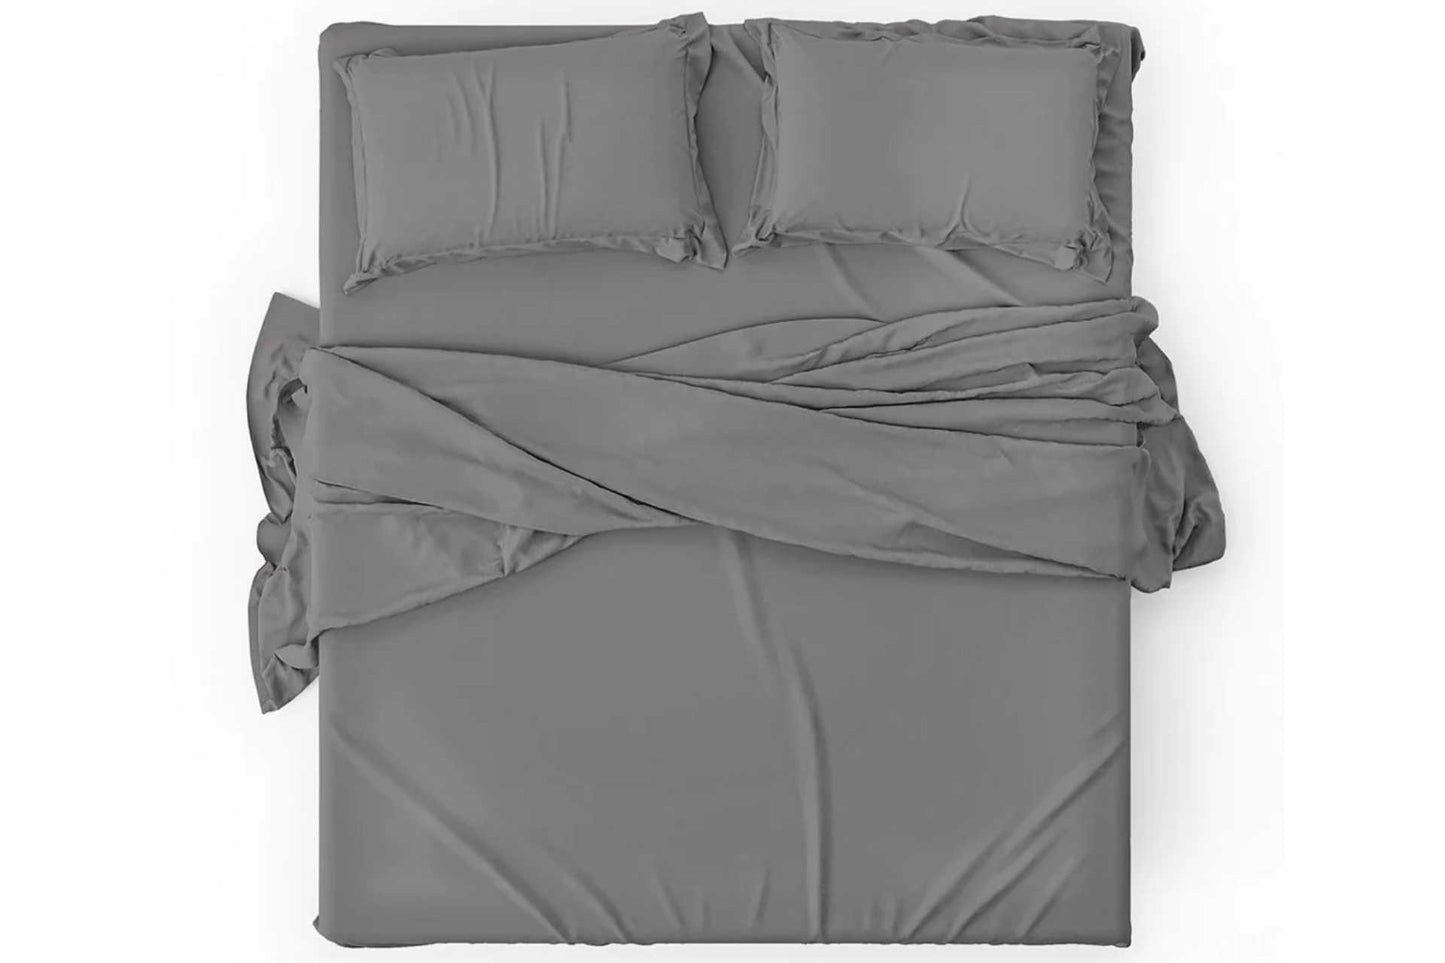 Egyptian Cotton Fitted Sheets